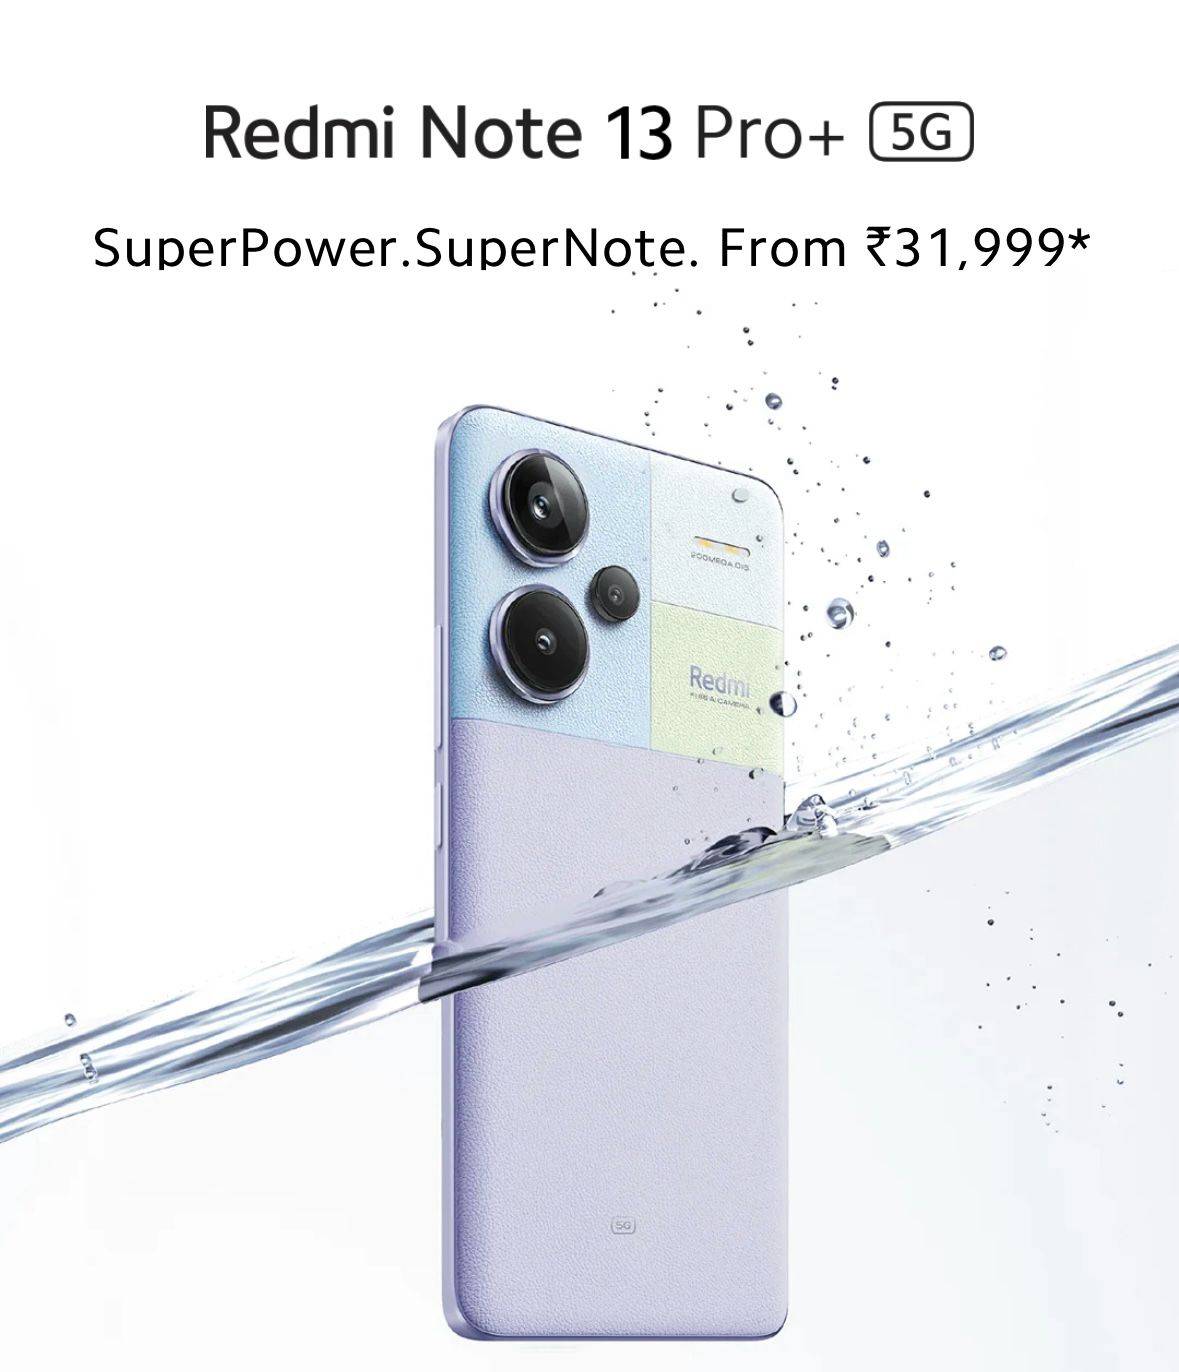 Redmi Note 13 Pro Plus launched in India at Rs 31,999; check